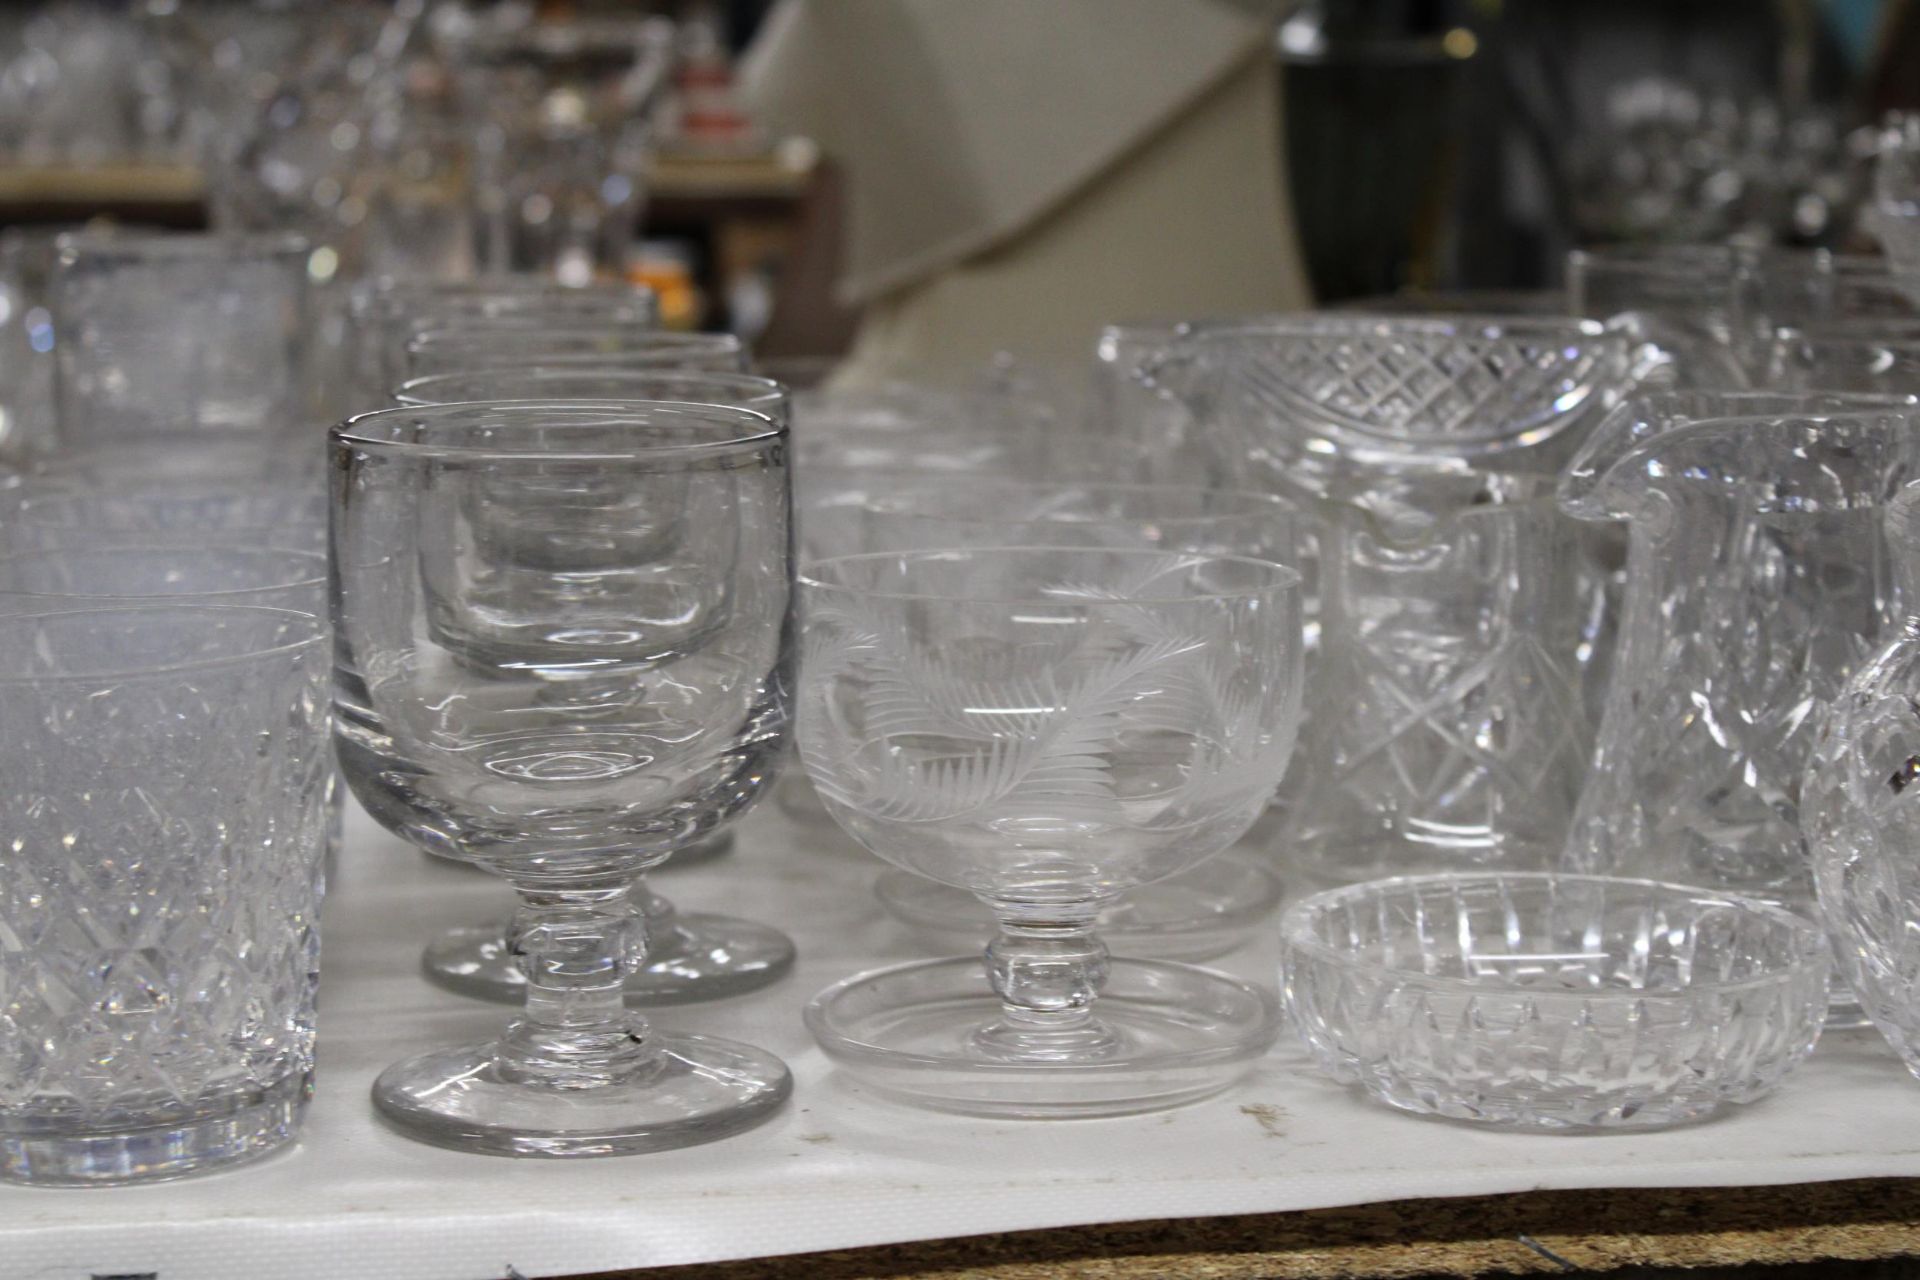 A LARGE COLLECTION OF GLASSWARE TO INCLUDE DESSERT DISHES, JUGS, WINE GLASSES ETC - Image 3 of 6